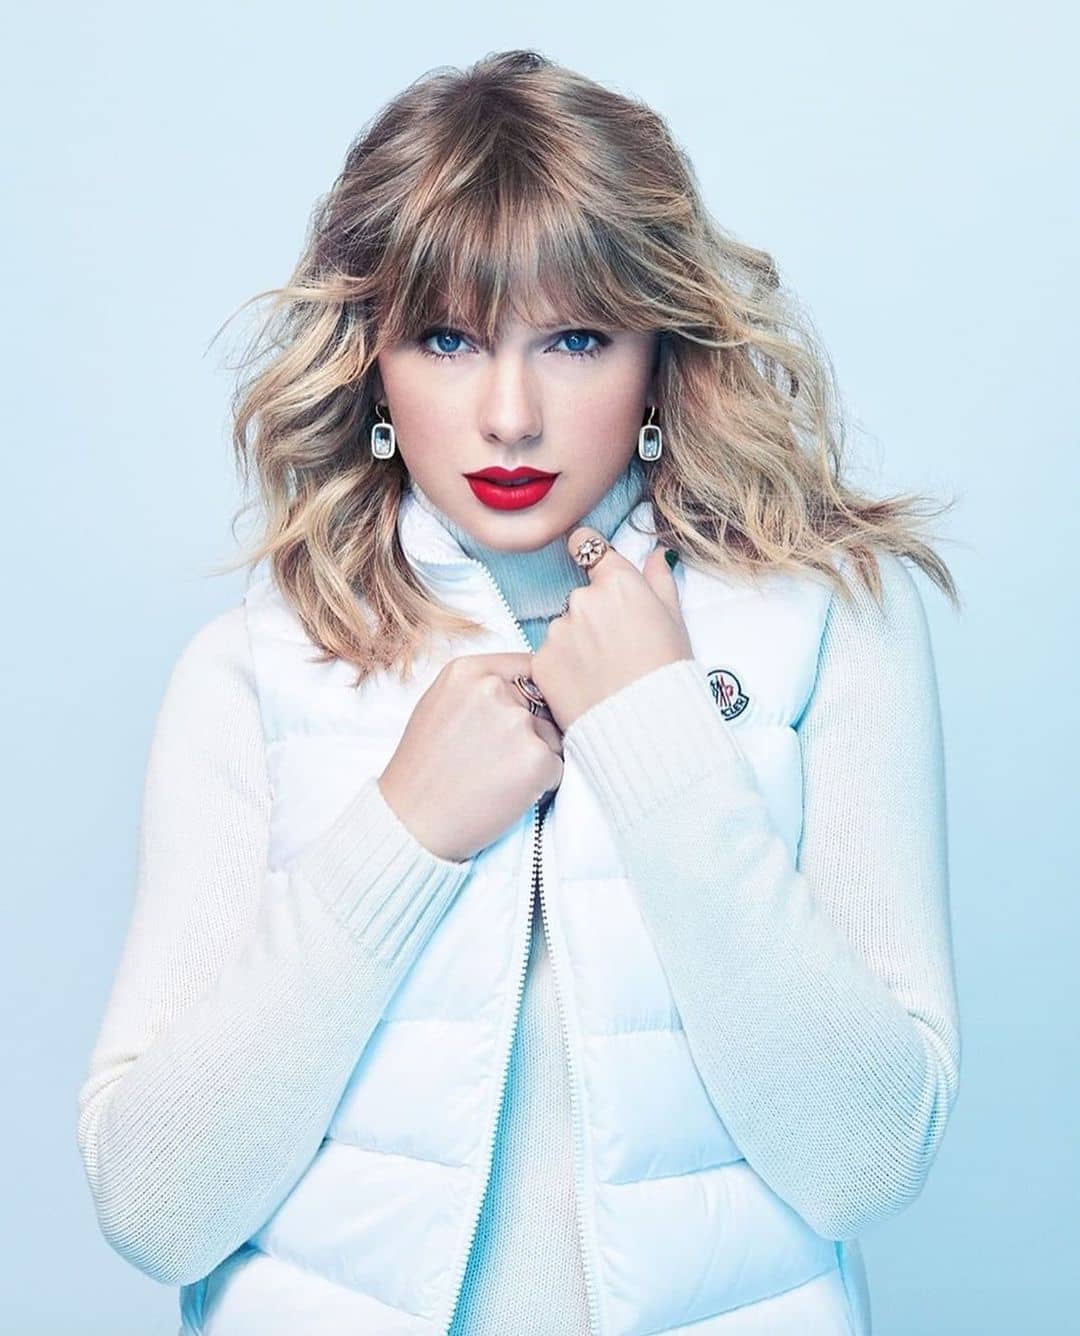 taylor swift biography online